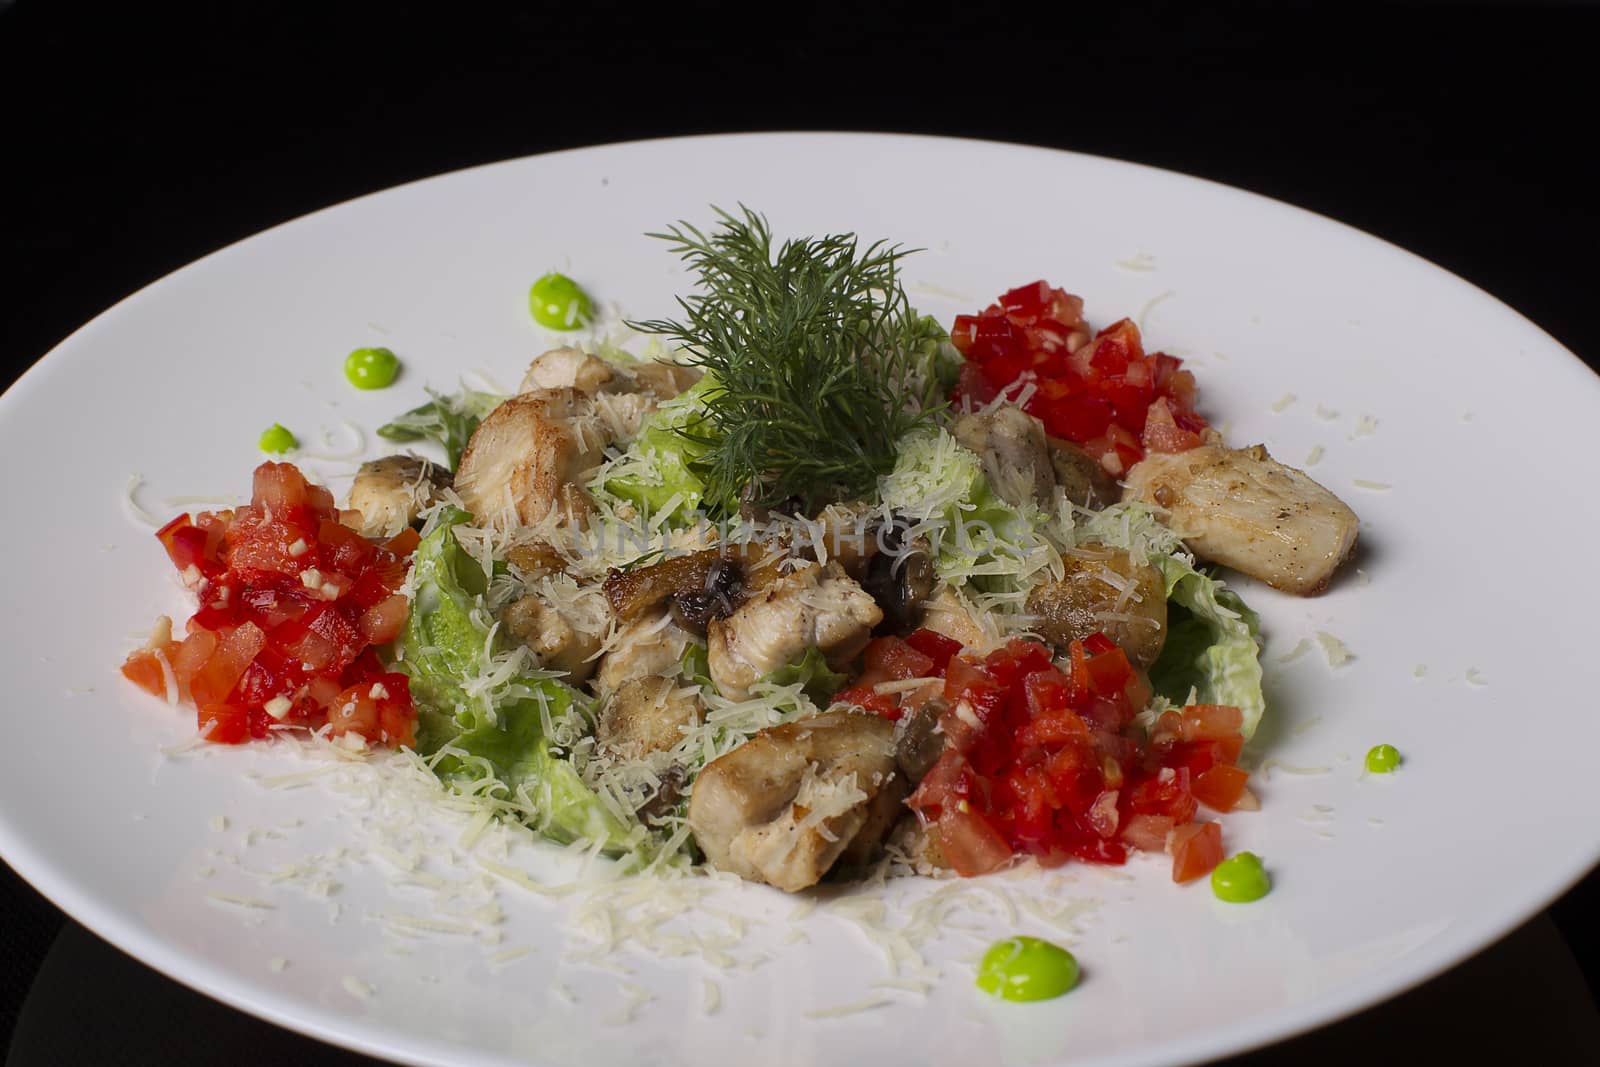 On a white plate salad of meat, tomatoes, lettuce, dill, sprinkled with cheese, on a black background. by Sviatlana